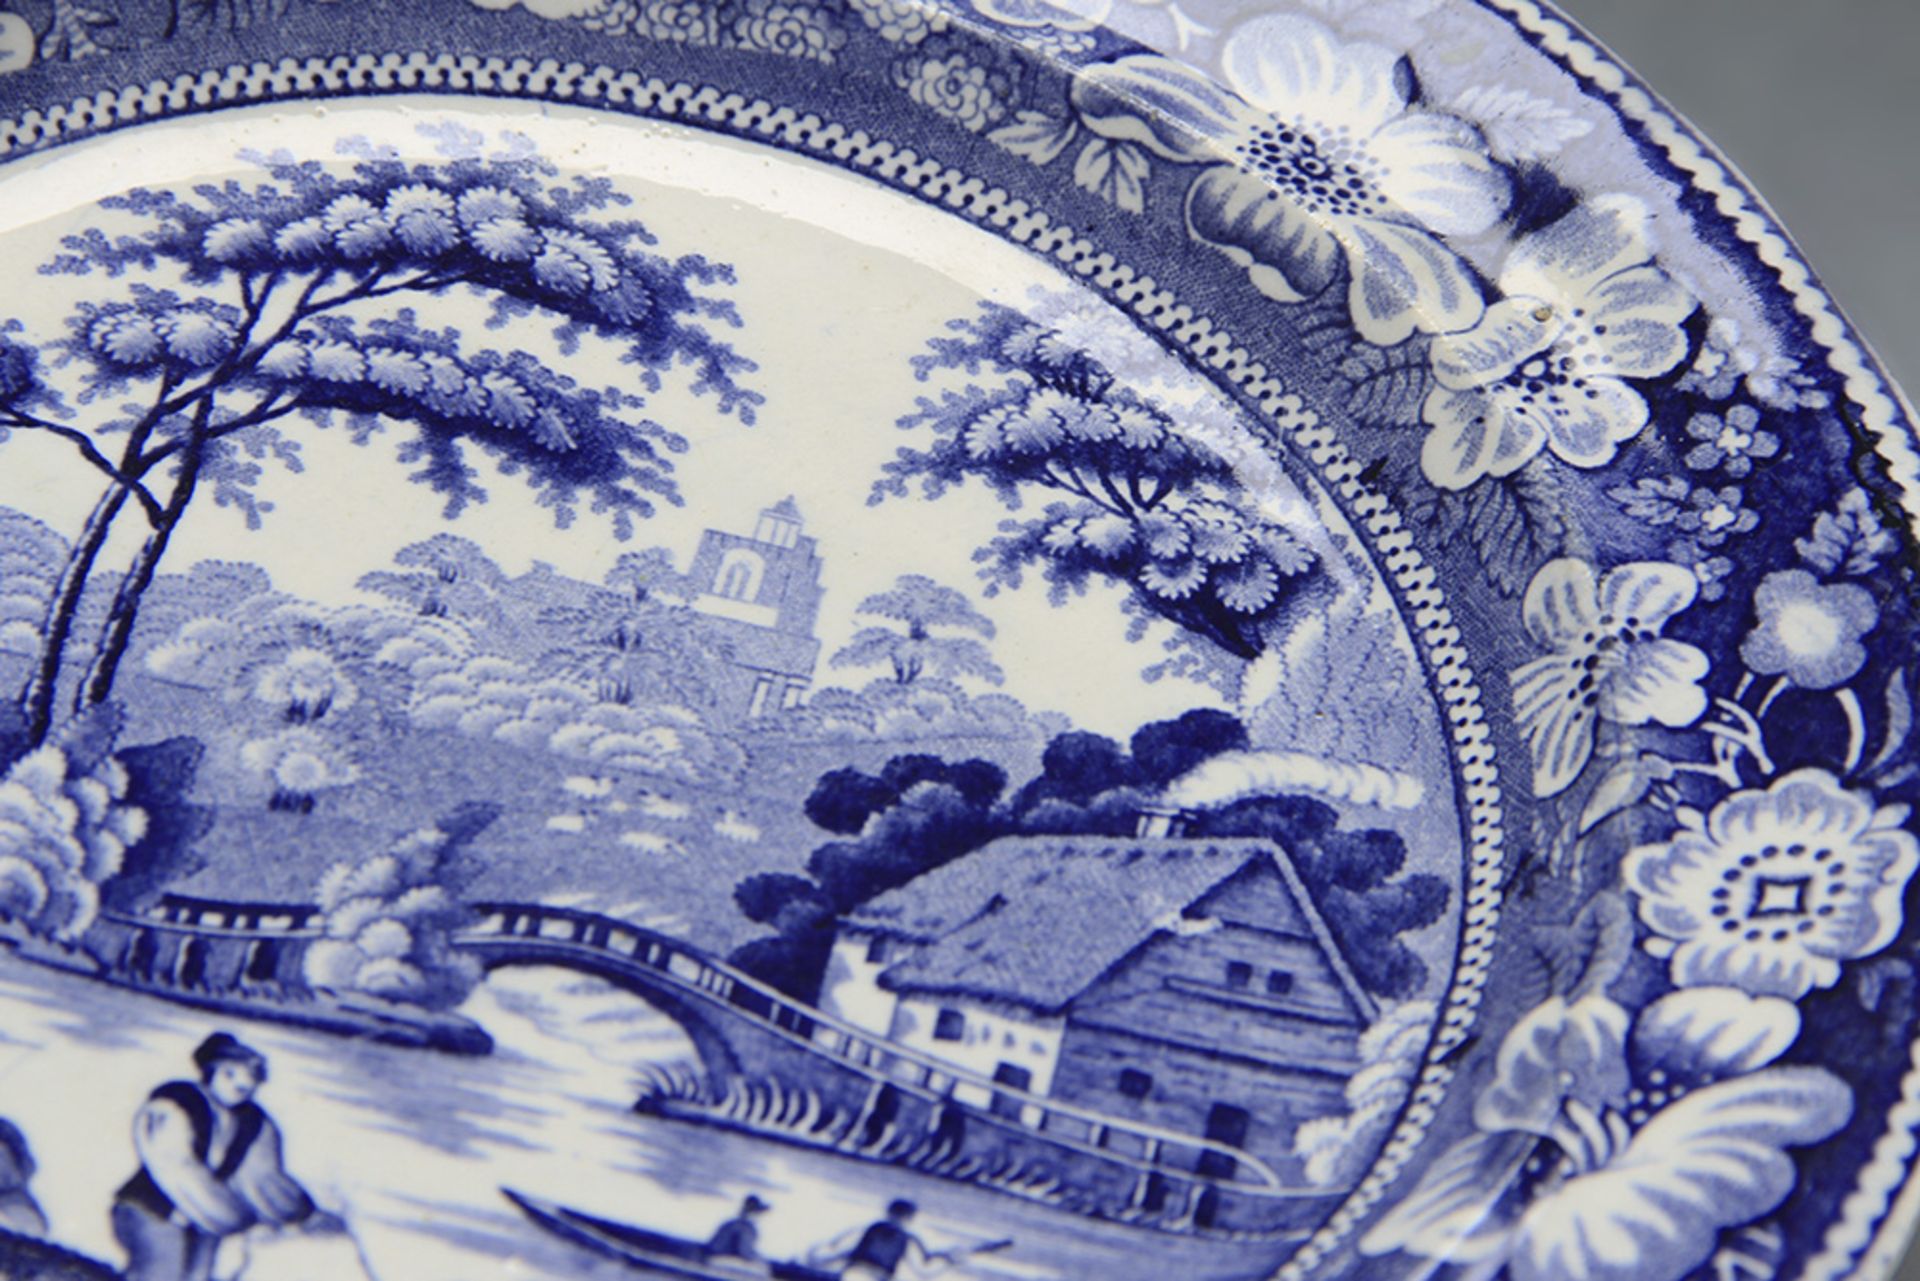 Antique Staffordshire Wild Rose Blue & White Plate C.1830 - Image 9 of 11